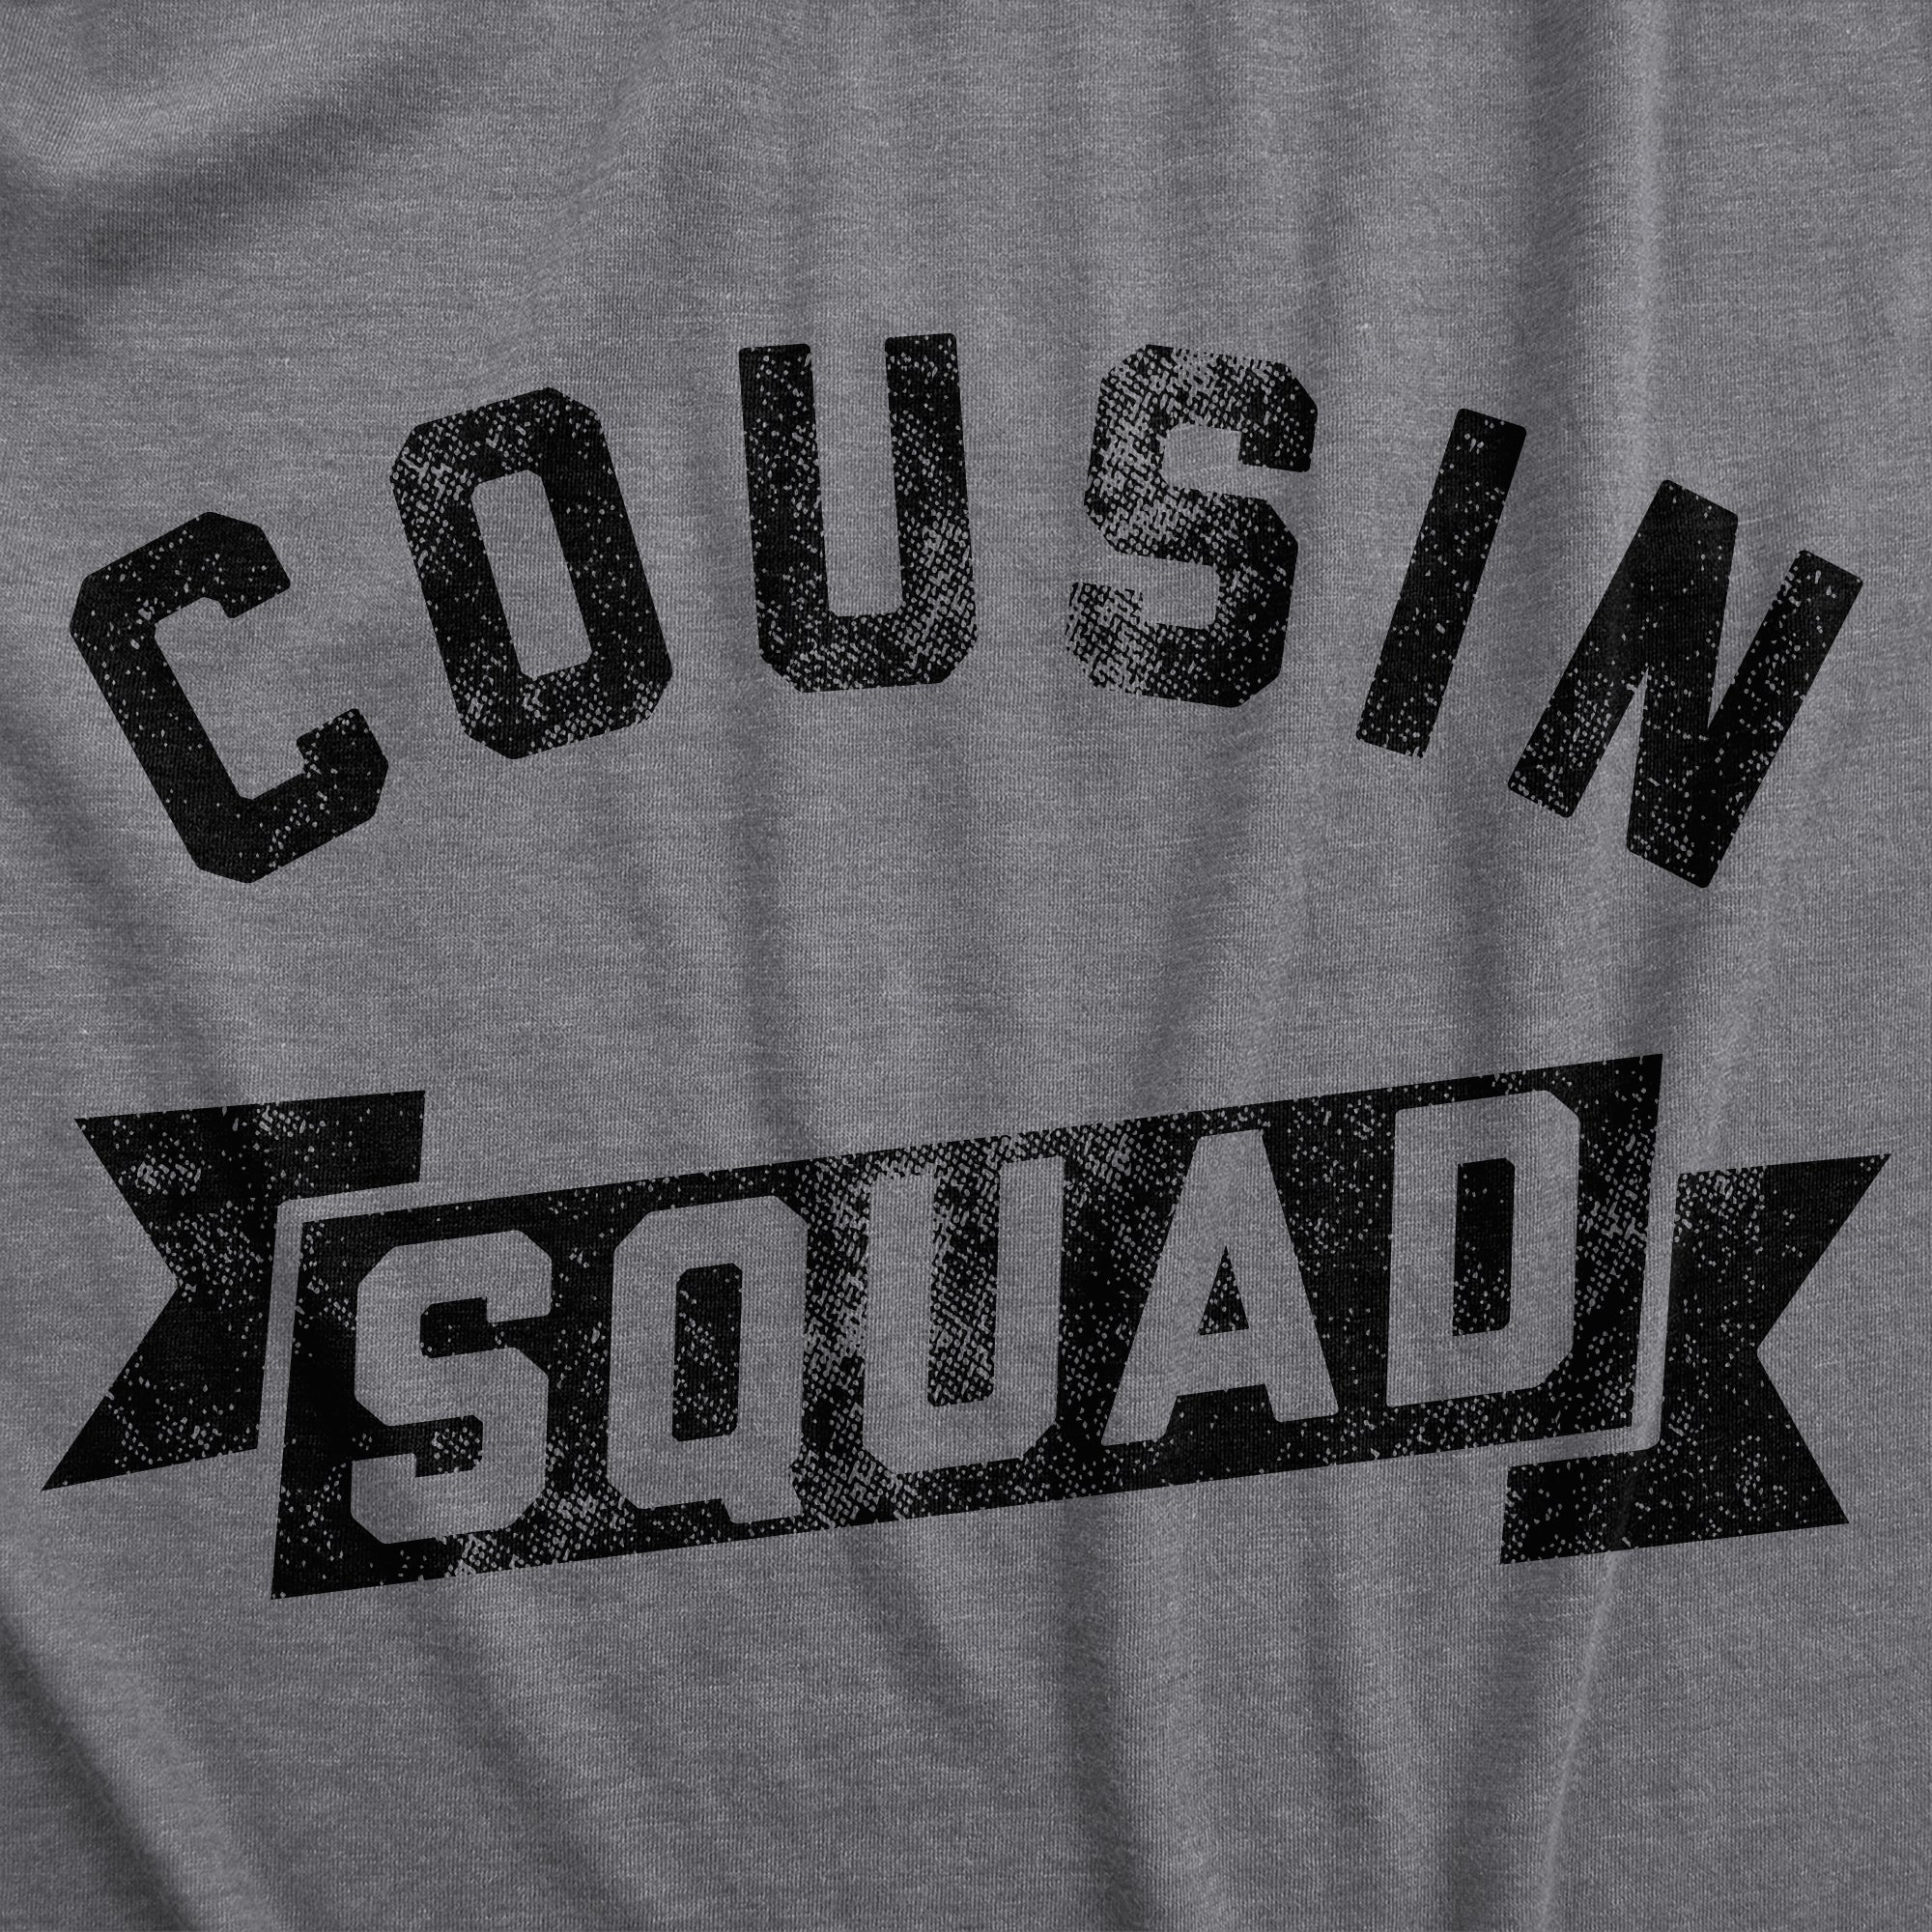 Funny Dark Heather Grey - Cousin Squad Cousin Squad Youth T Shirt Nerdy Sarcastic Tee